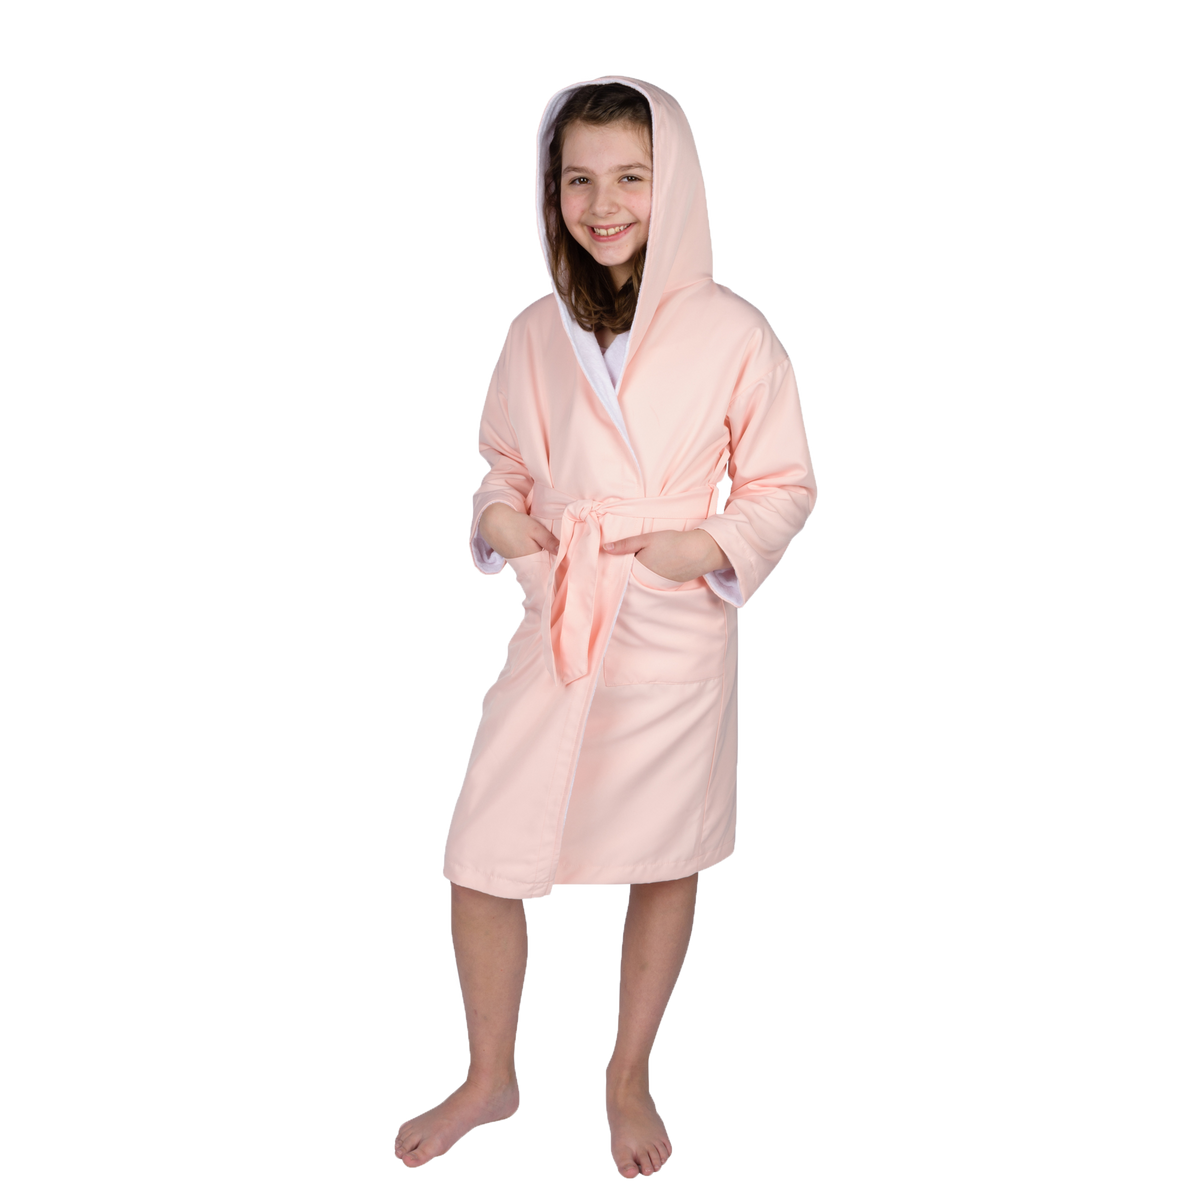 ComfyDown Kids Luxury Pink Hooded Bathrobe for Girls- Soft, Plush - Made in USA